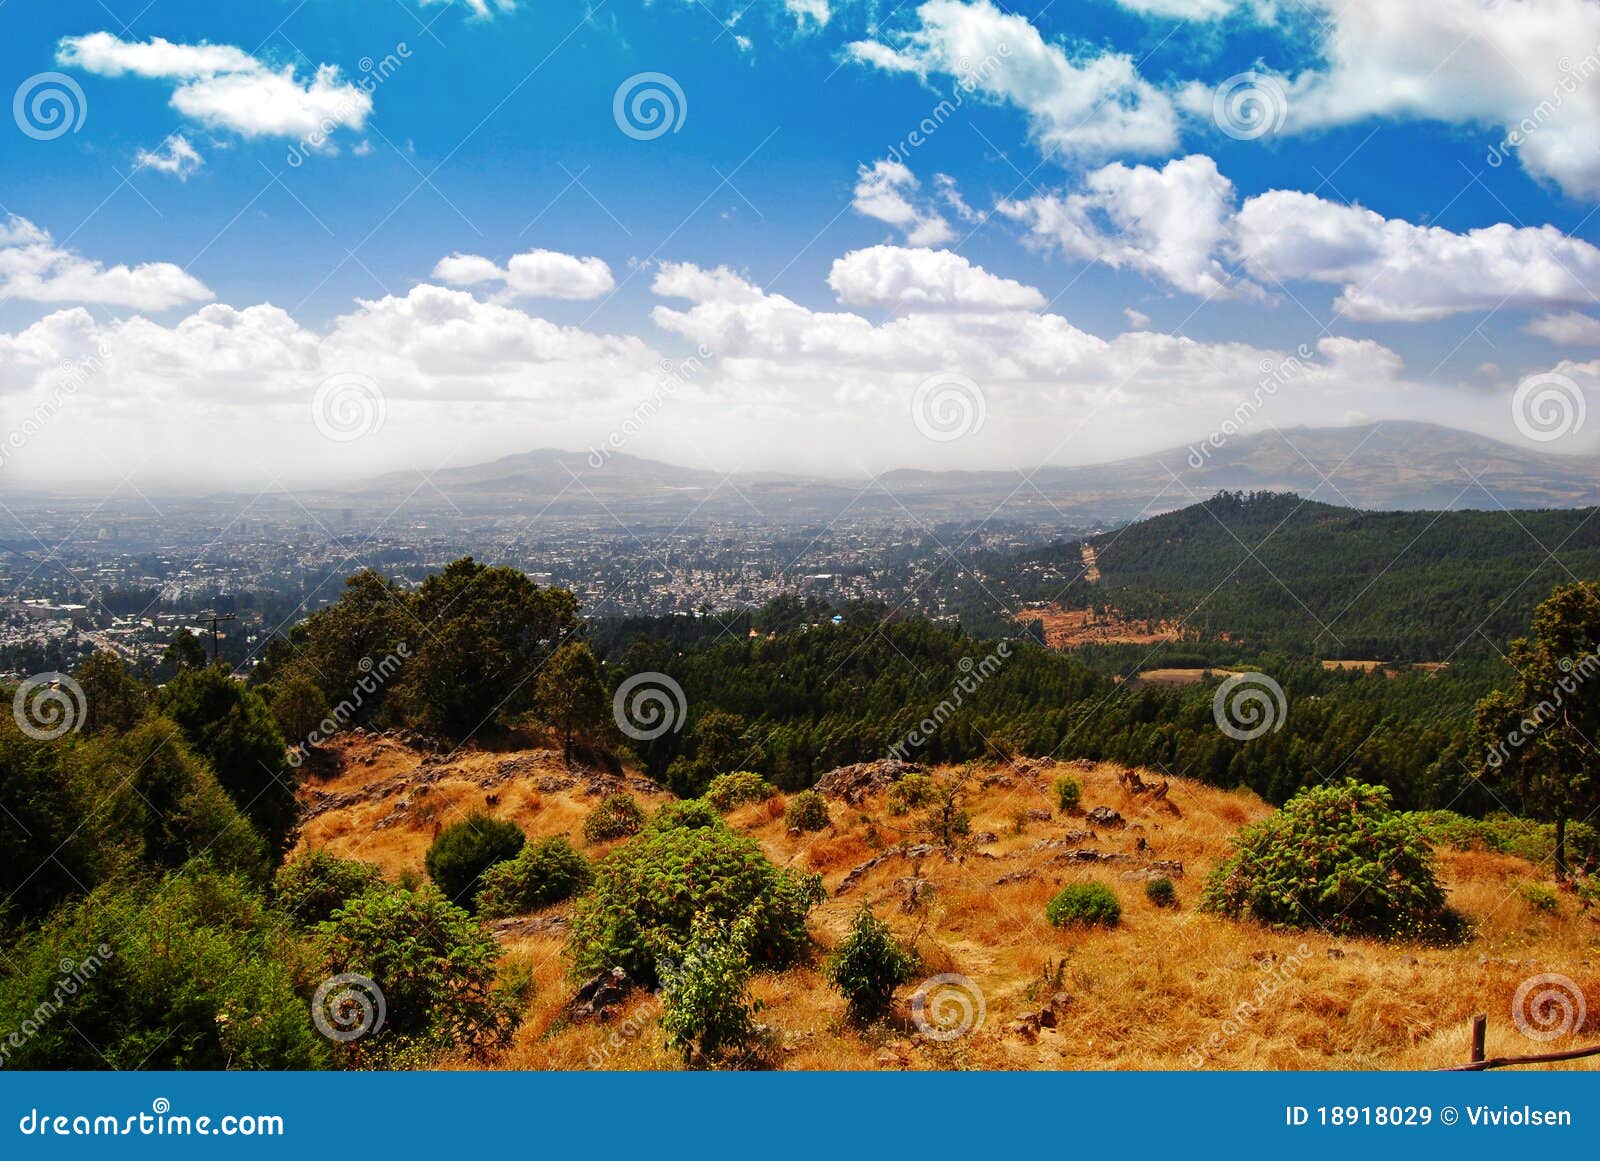 view of addis ababa